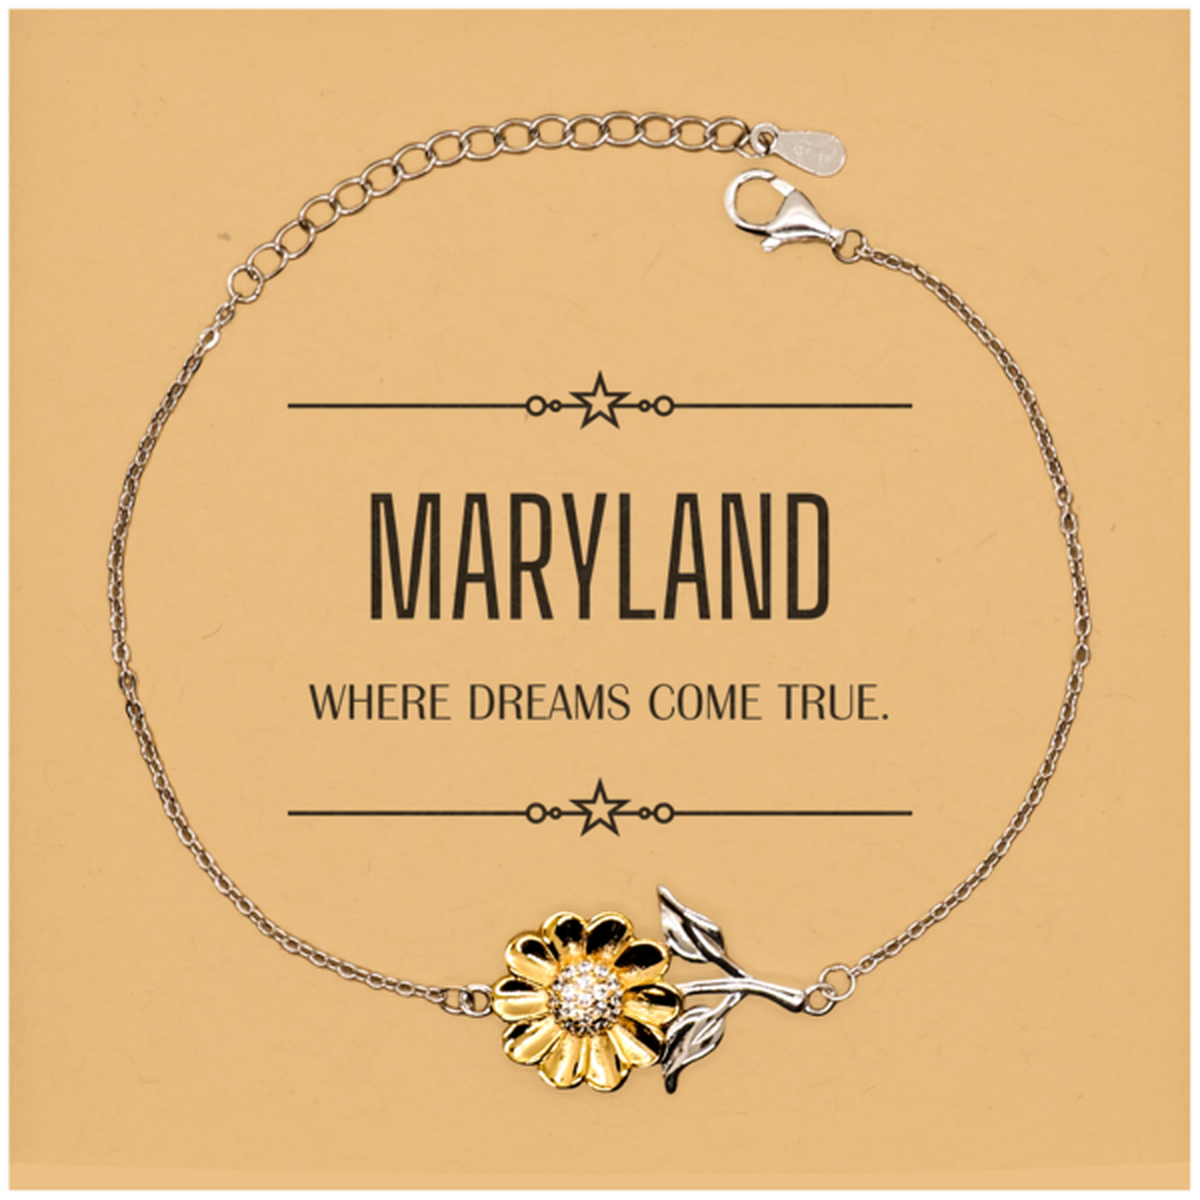 Love Maryland State Sunflower Bracelet, Maryland Where dreams come true, Birthday Christmas Inspirational Gifts For Maryland Men, Women, Friends